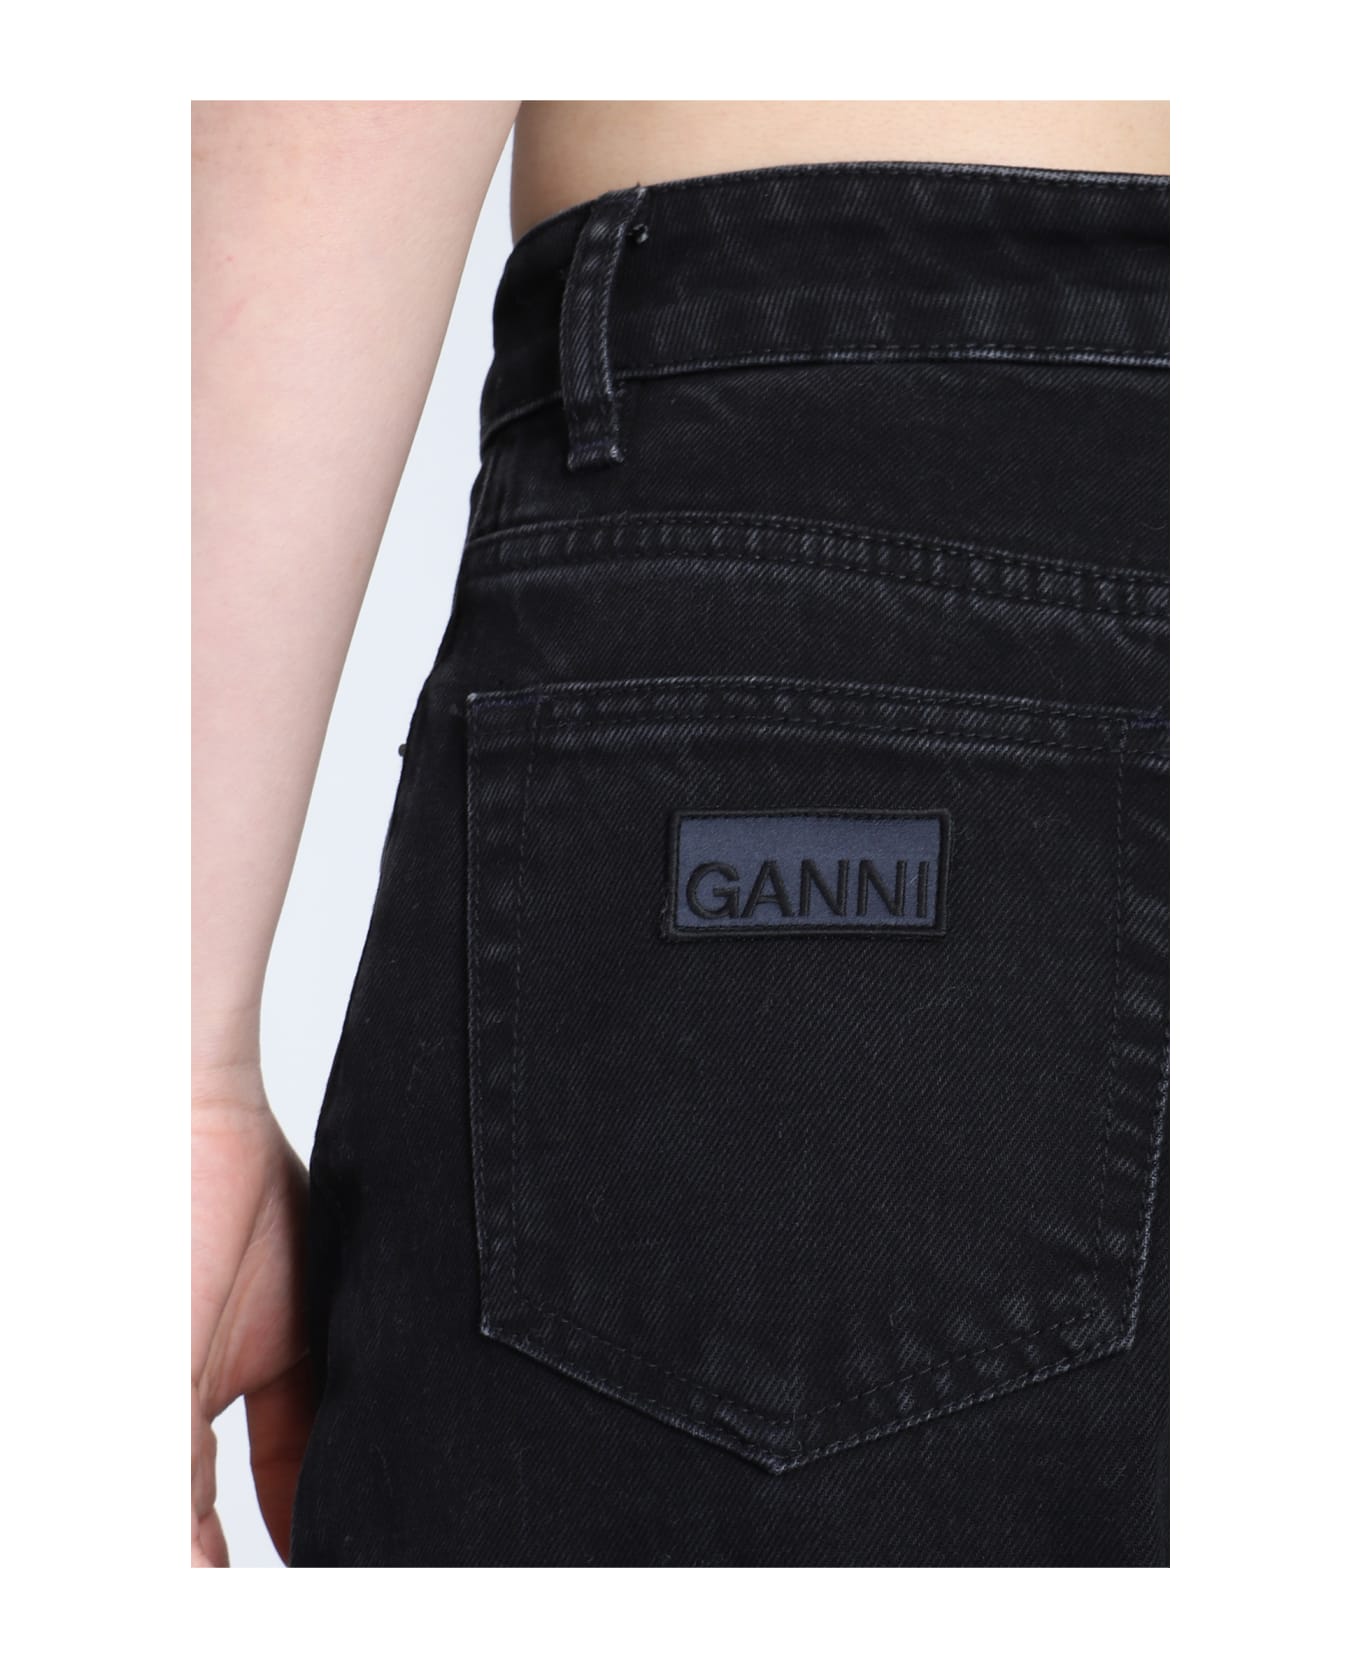 Ganni Stary Jeans In Black Cotton - Washed Black デニム